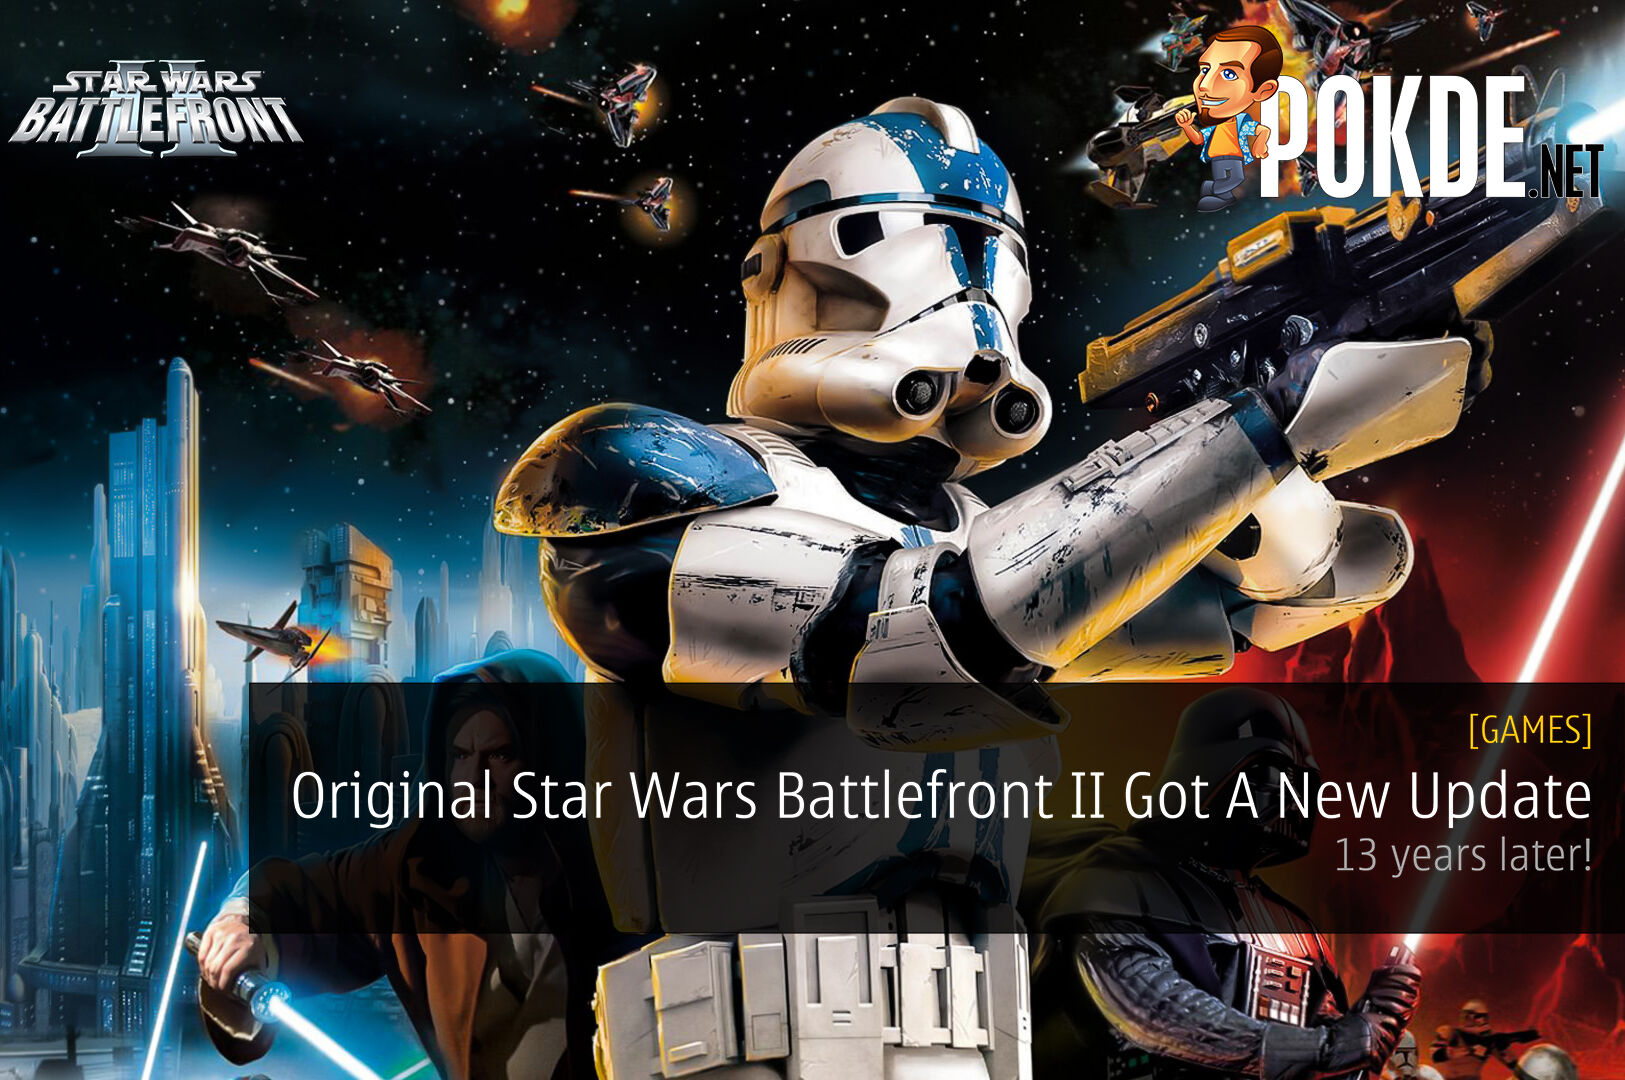 Star Wars Battlefront II Gets A New Patch - Over A Decade Later - Gameranx